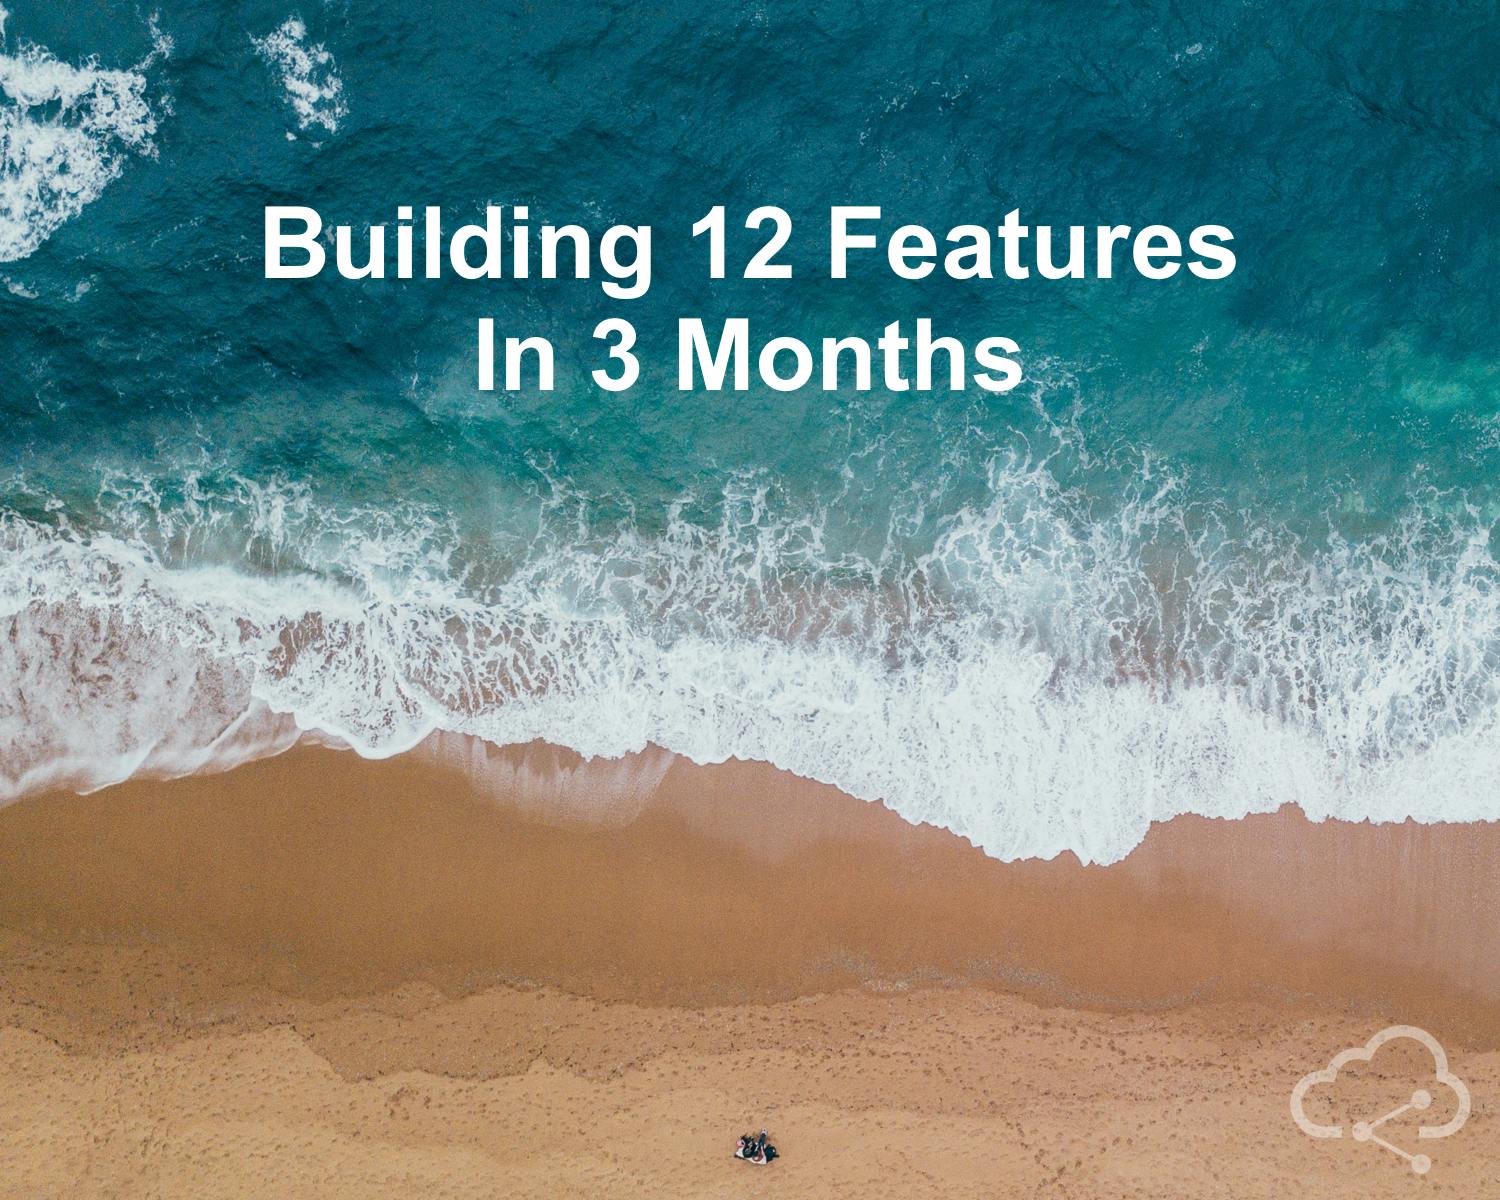 featured image - Building 12 Features In 3 Months